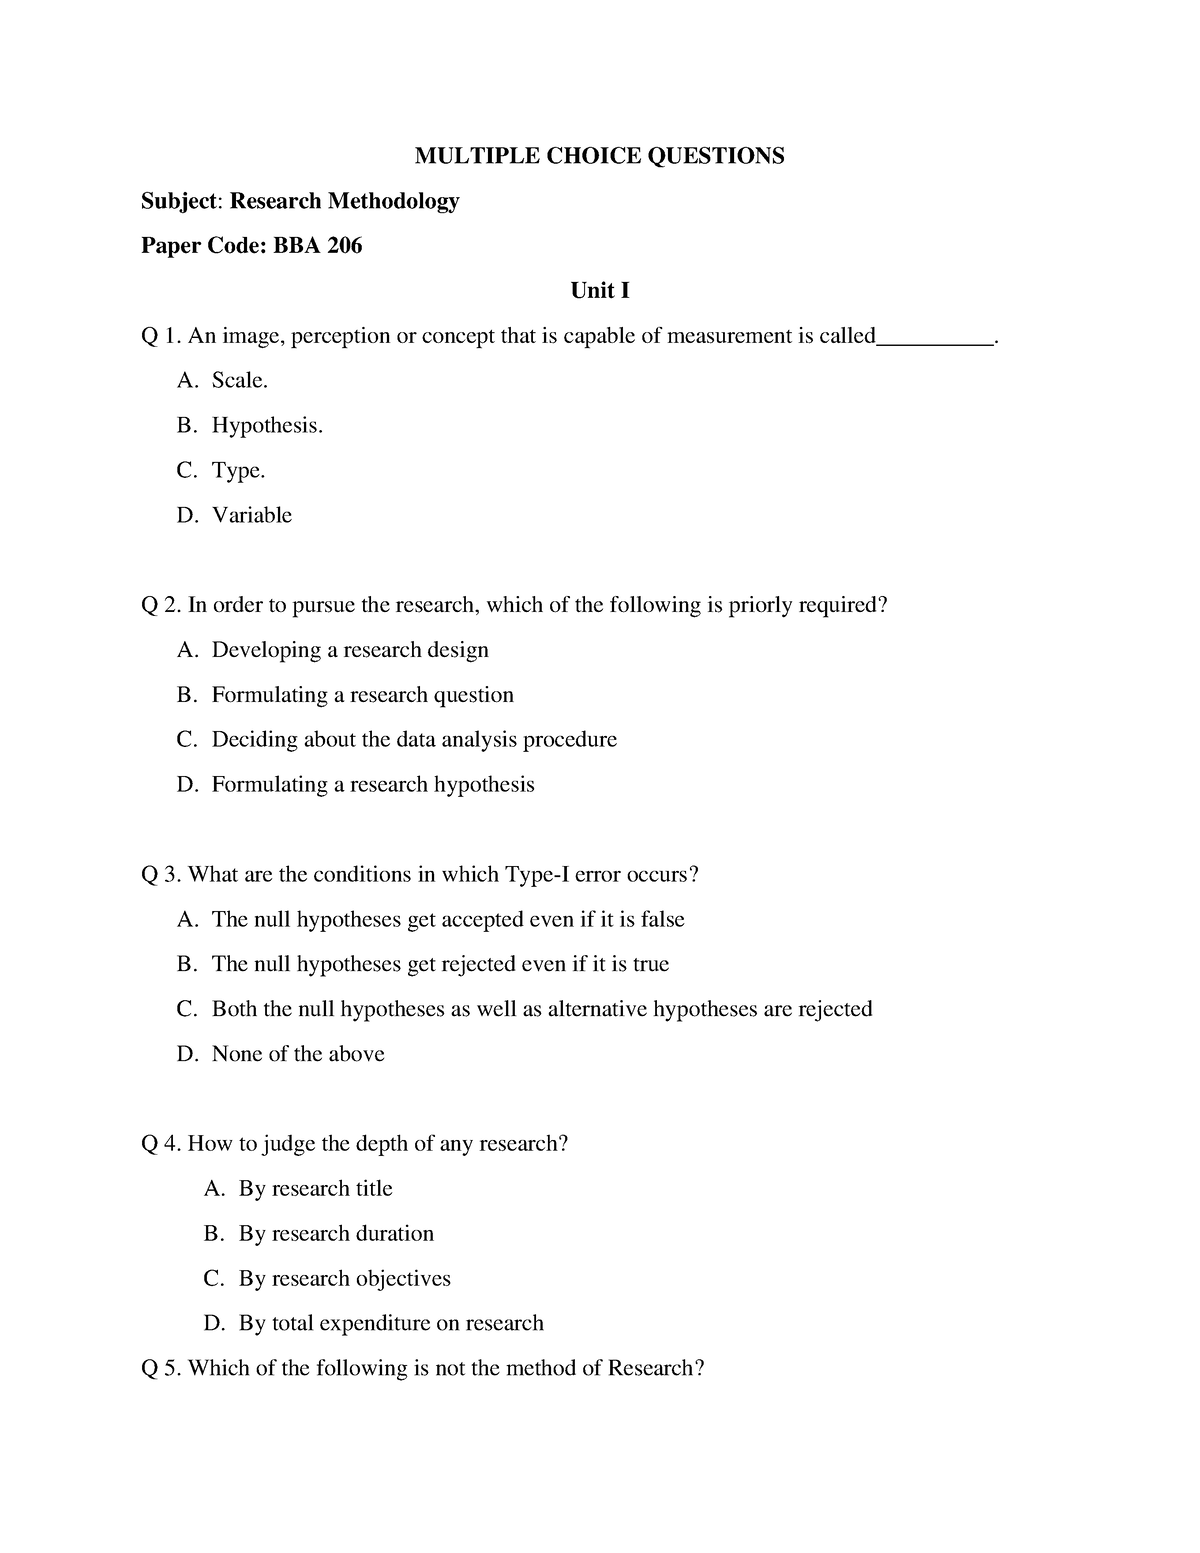 research methodology multiple choice questions and answers pdf